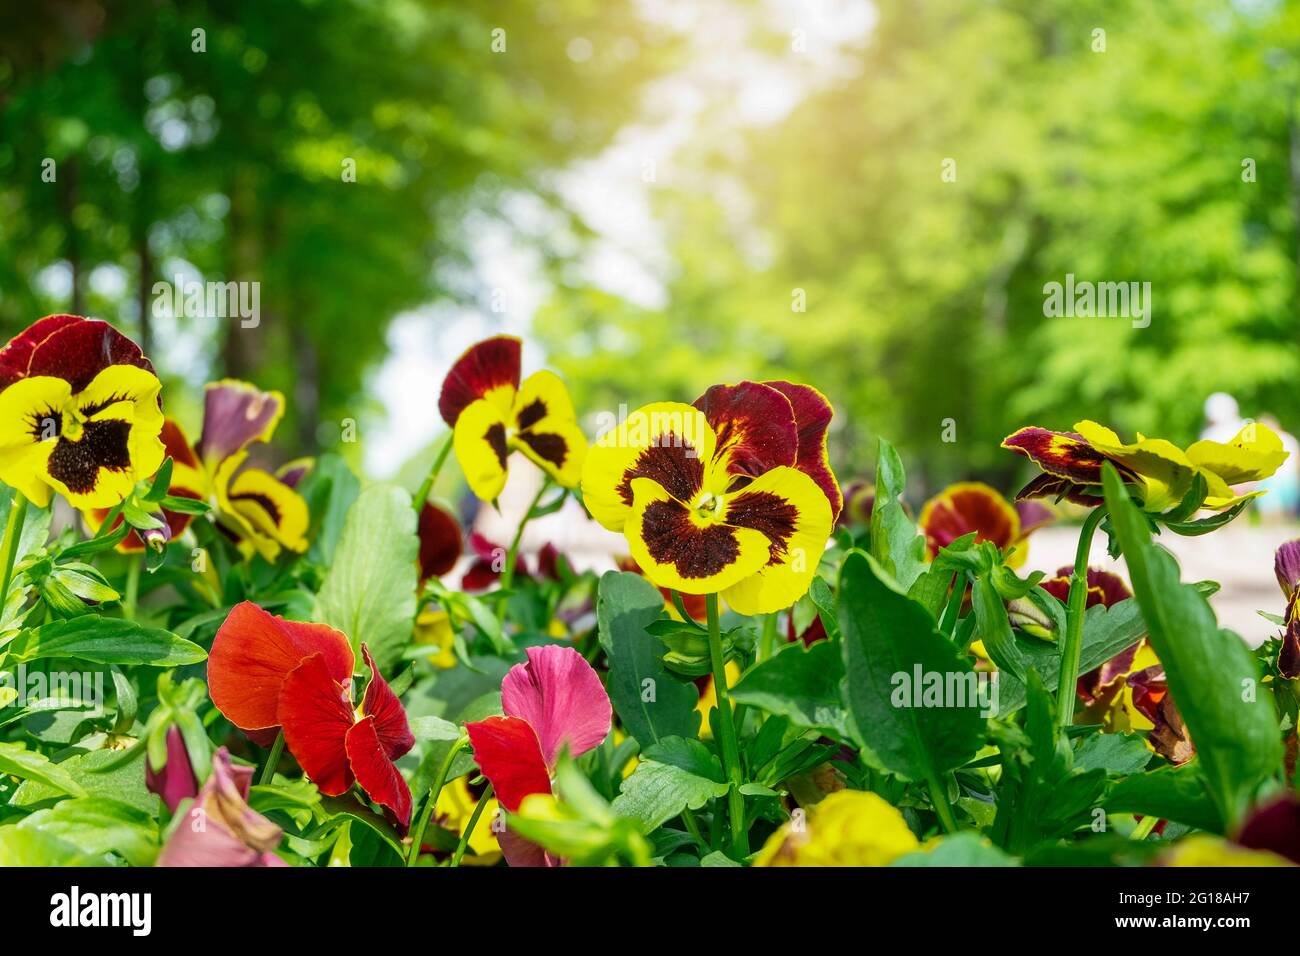 Blooming viola annual plant on a blurred background Stock Photo